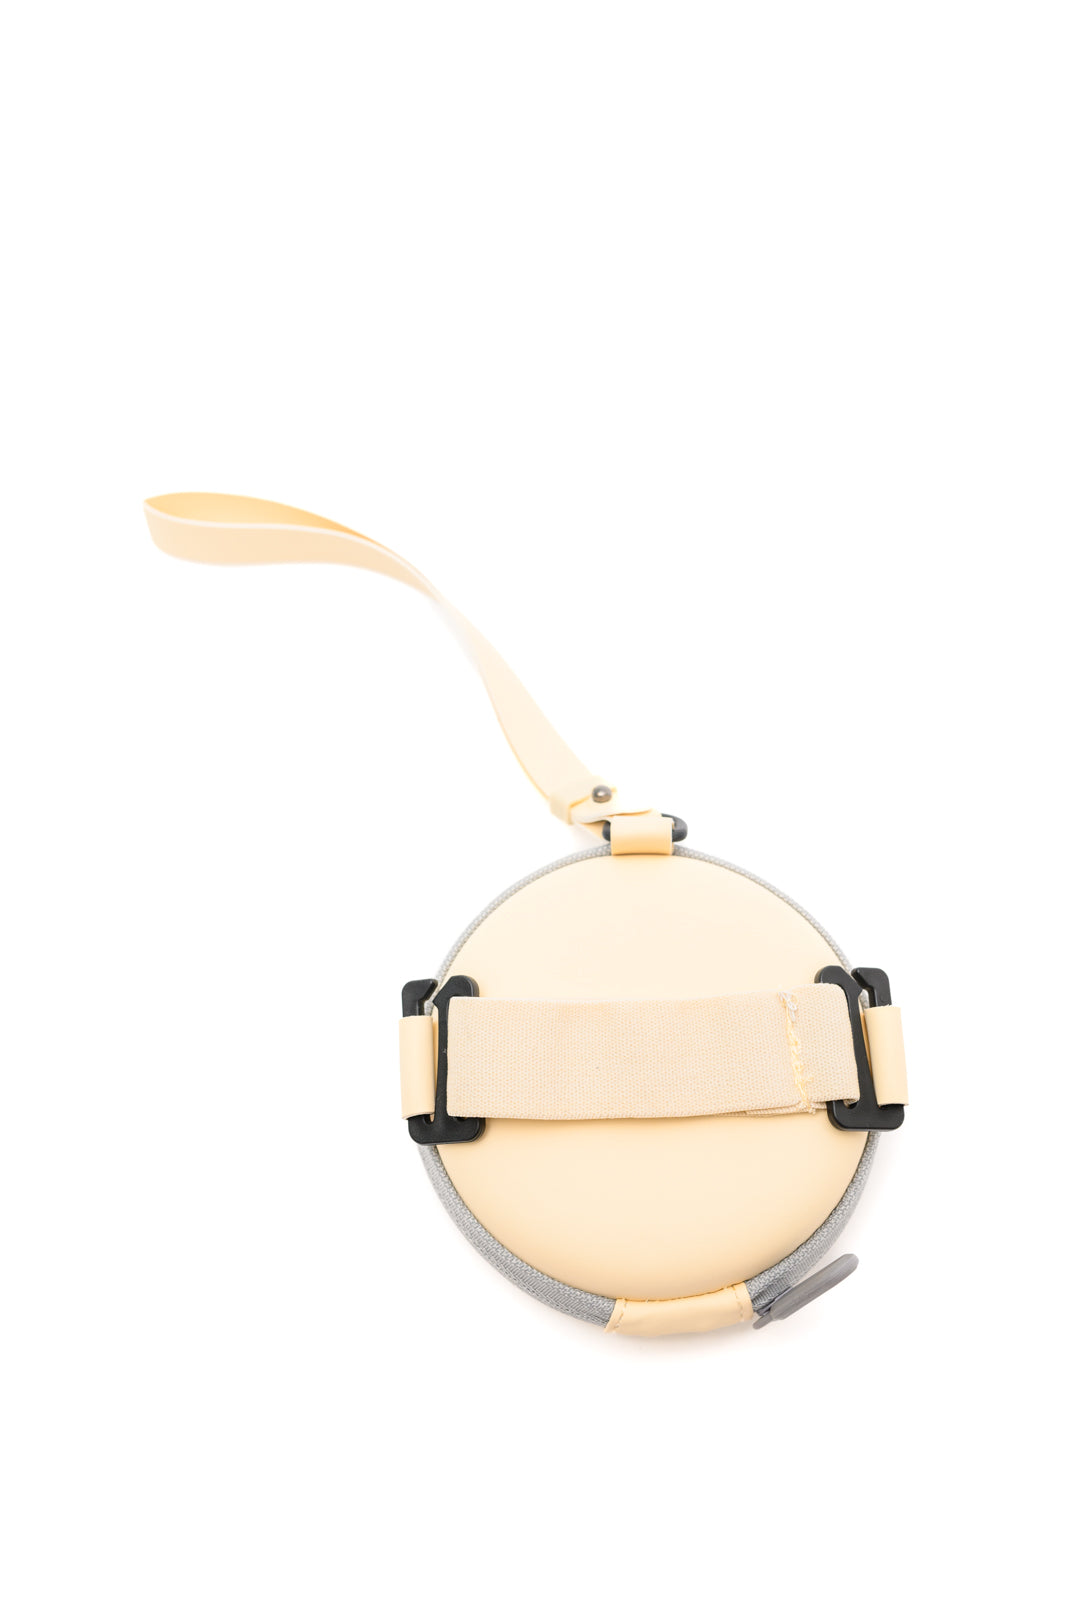 Collapsible Girlfriend Sunnies &amp; Case in Champagne - WEBSITE EXCLUSIVE